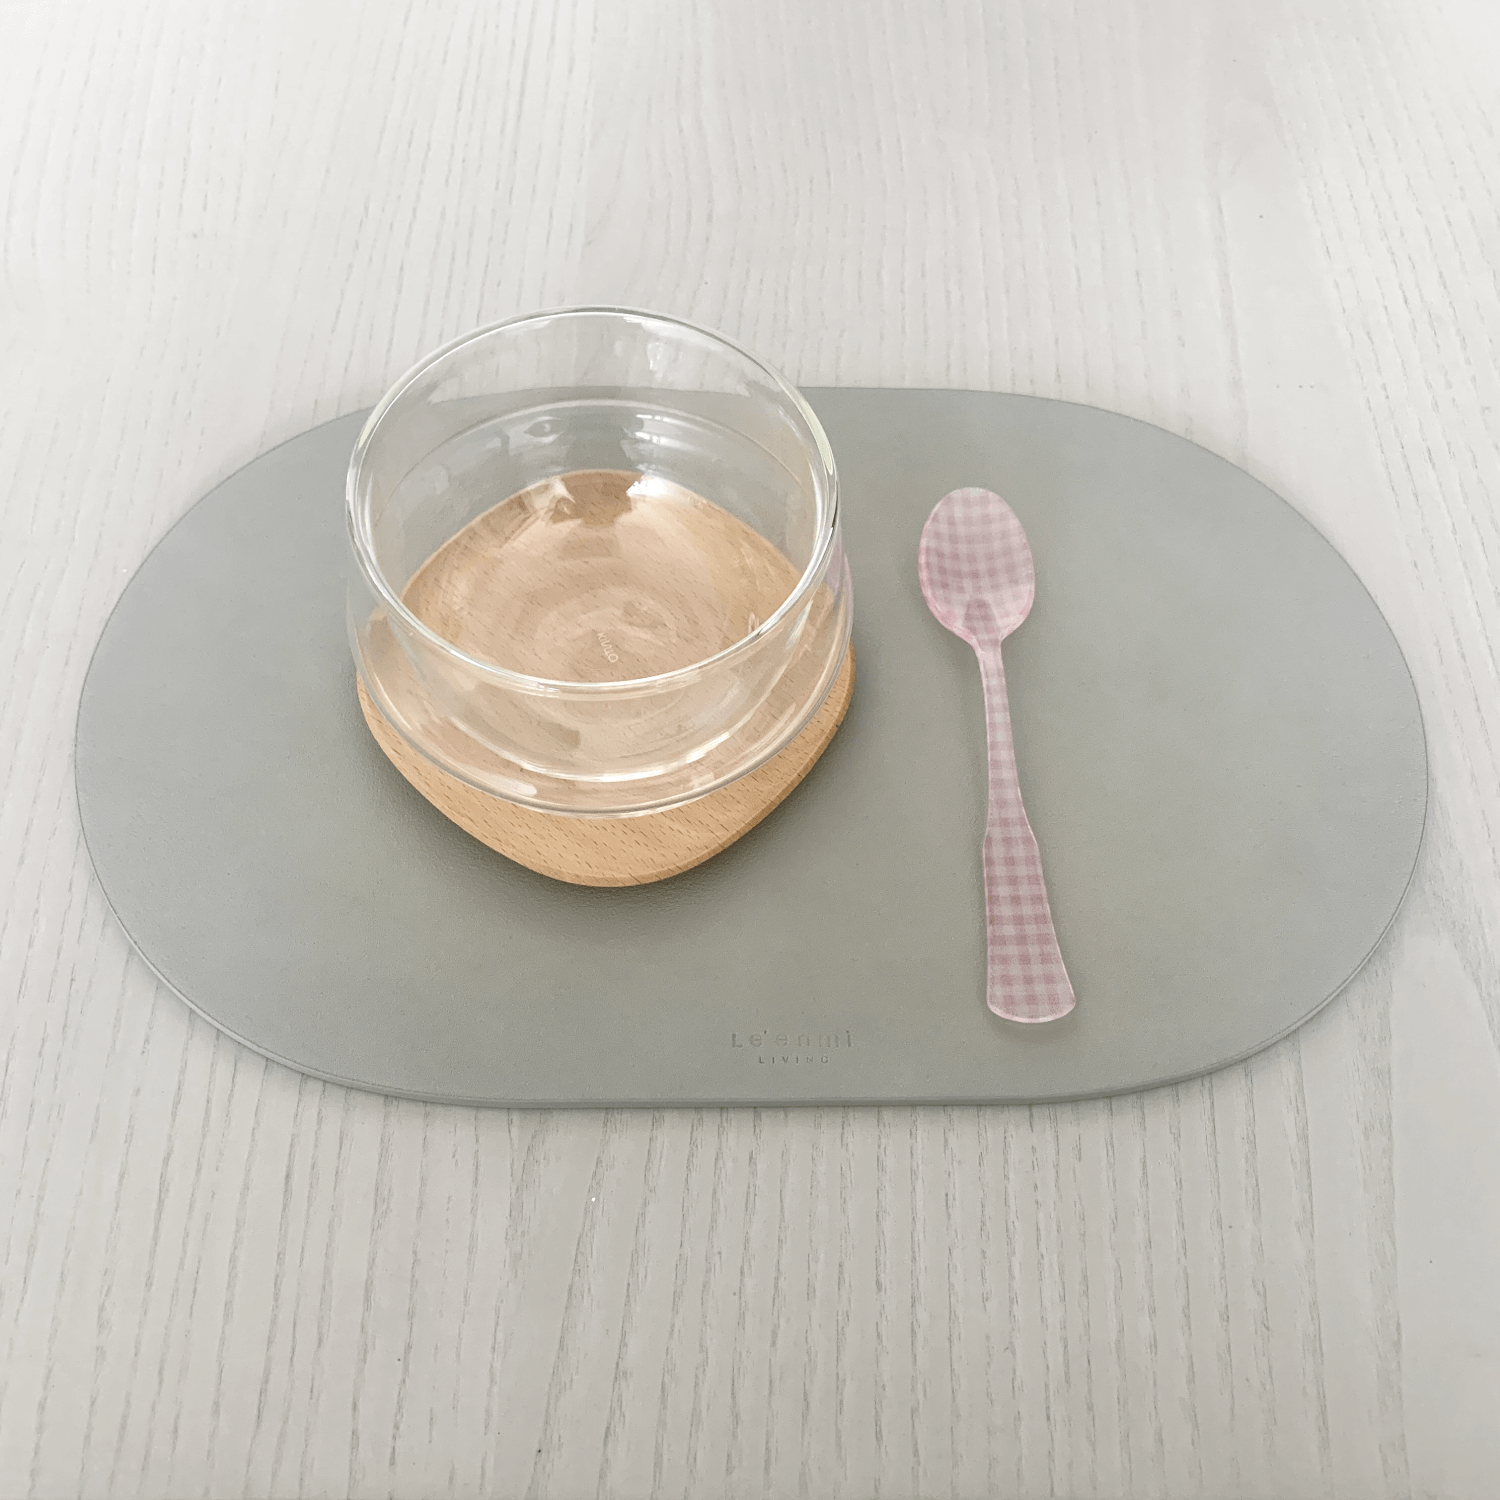 Le'enmi Oval Double-Sided Leather Tray - 르엔미 양면 방수 타원